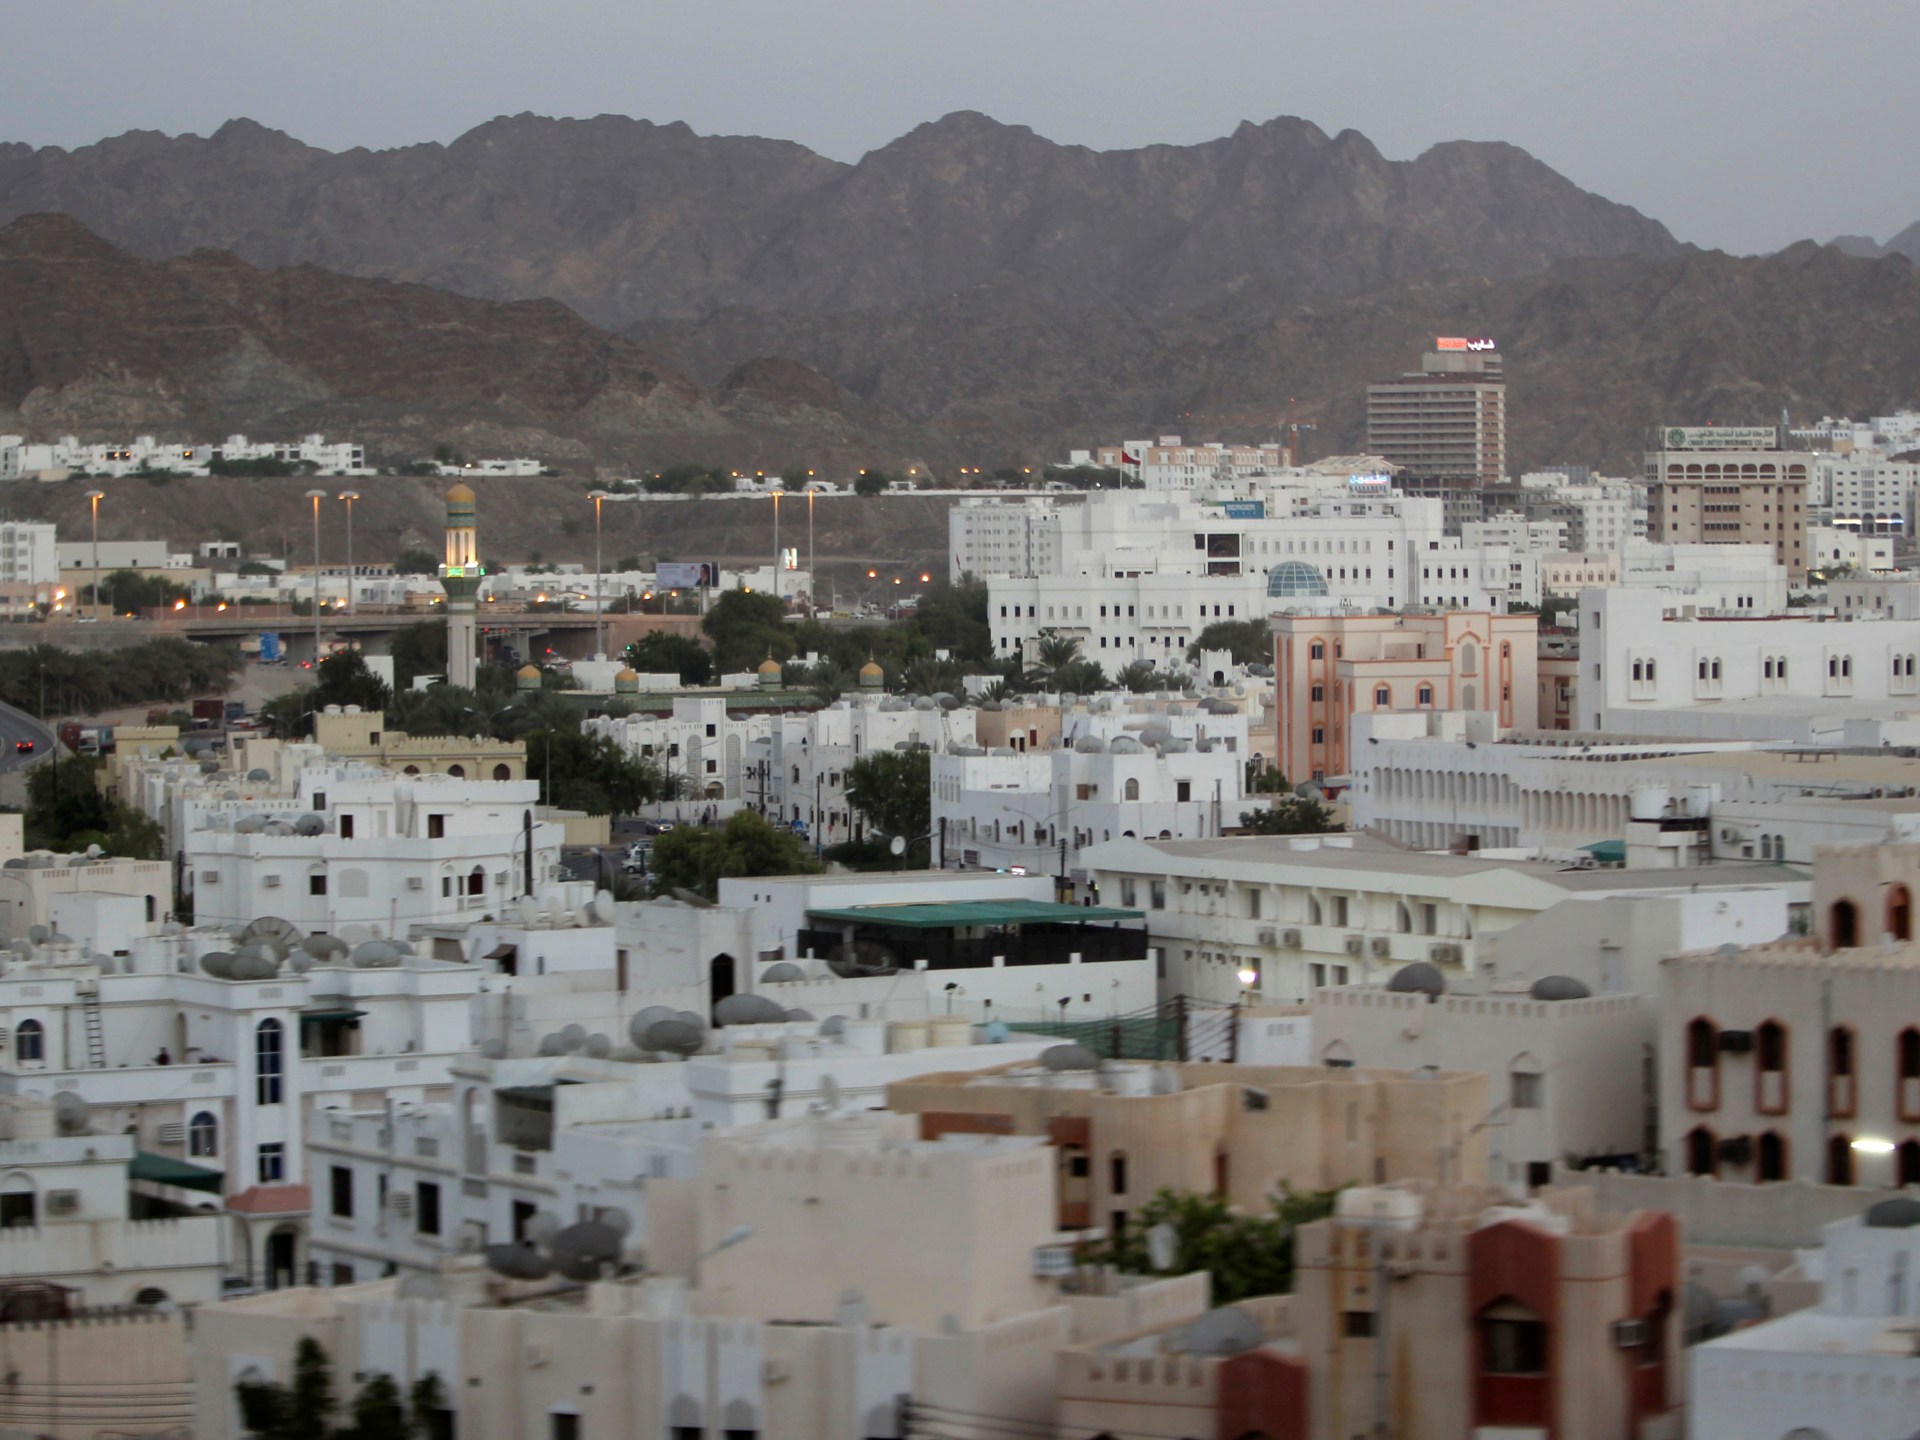 Oman mosque attack: What’s ISIL’s game plan? | ISIL/ISIS News